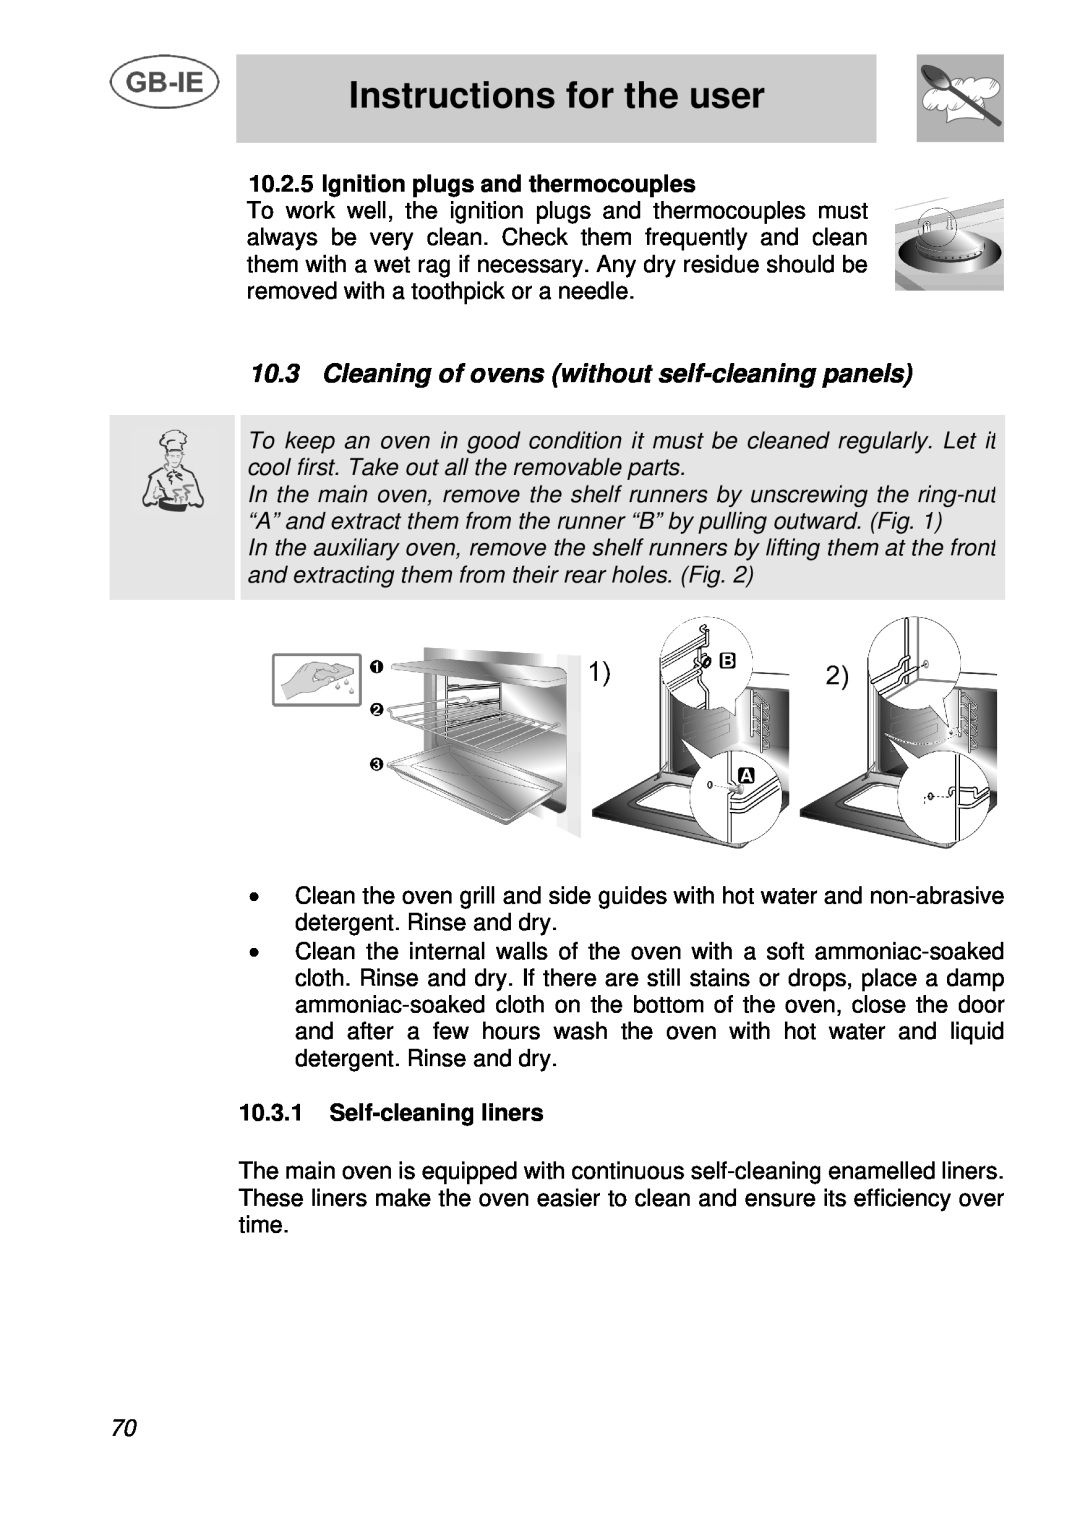 Smeg A3 manual Cleaning of ovens without self-cleaning panels, Instructions for the user, Ignition plugs and thermocouples 